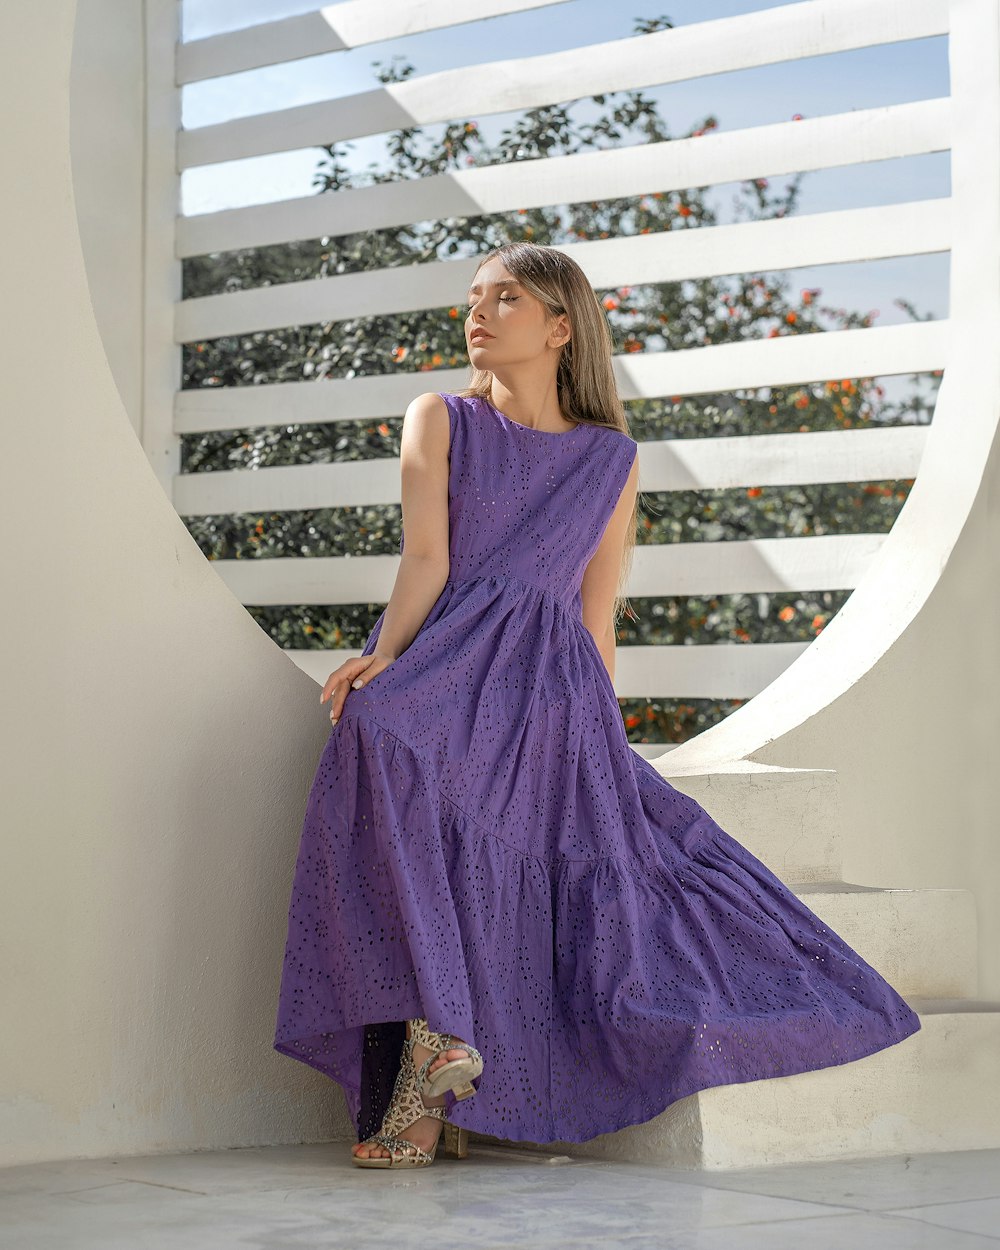 a woman in a purple dress leaning against a wall